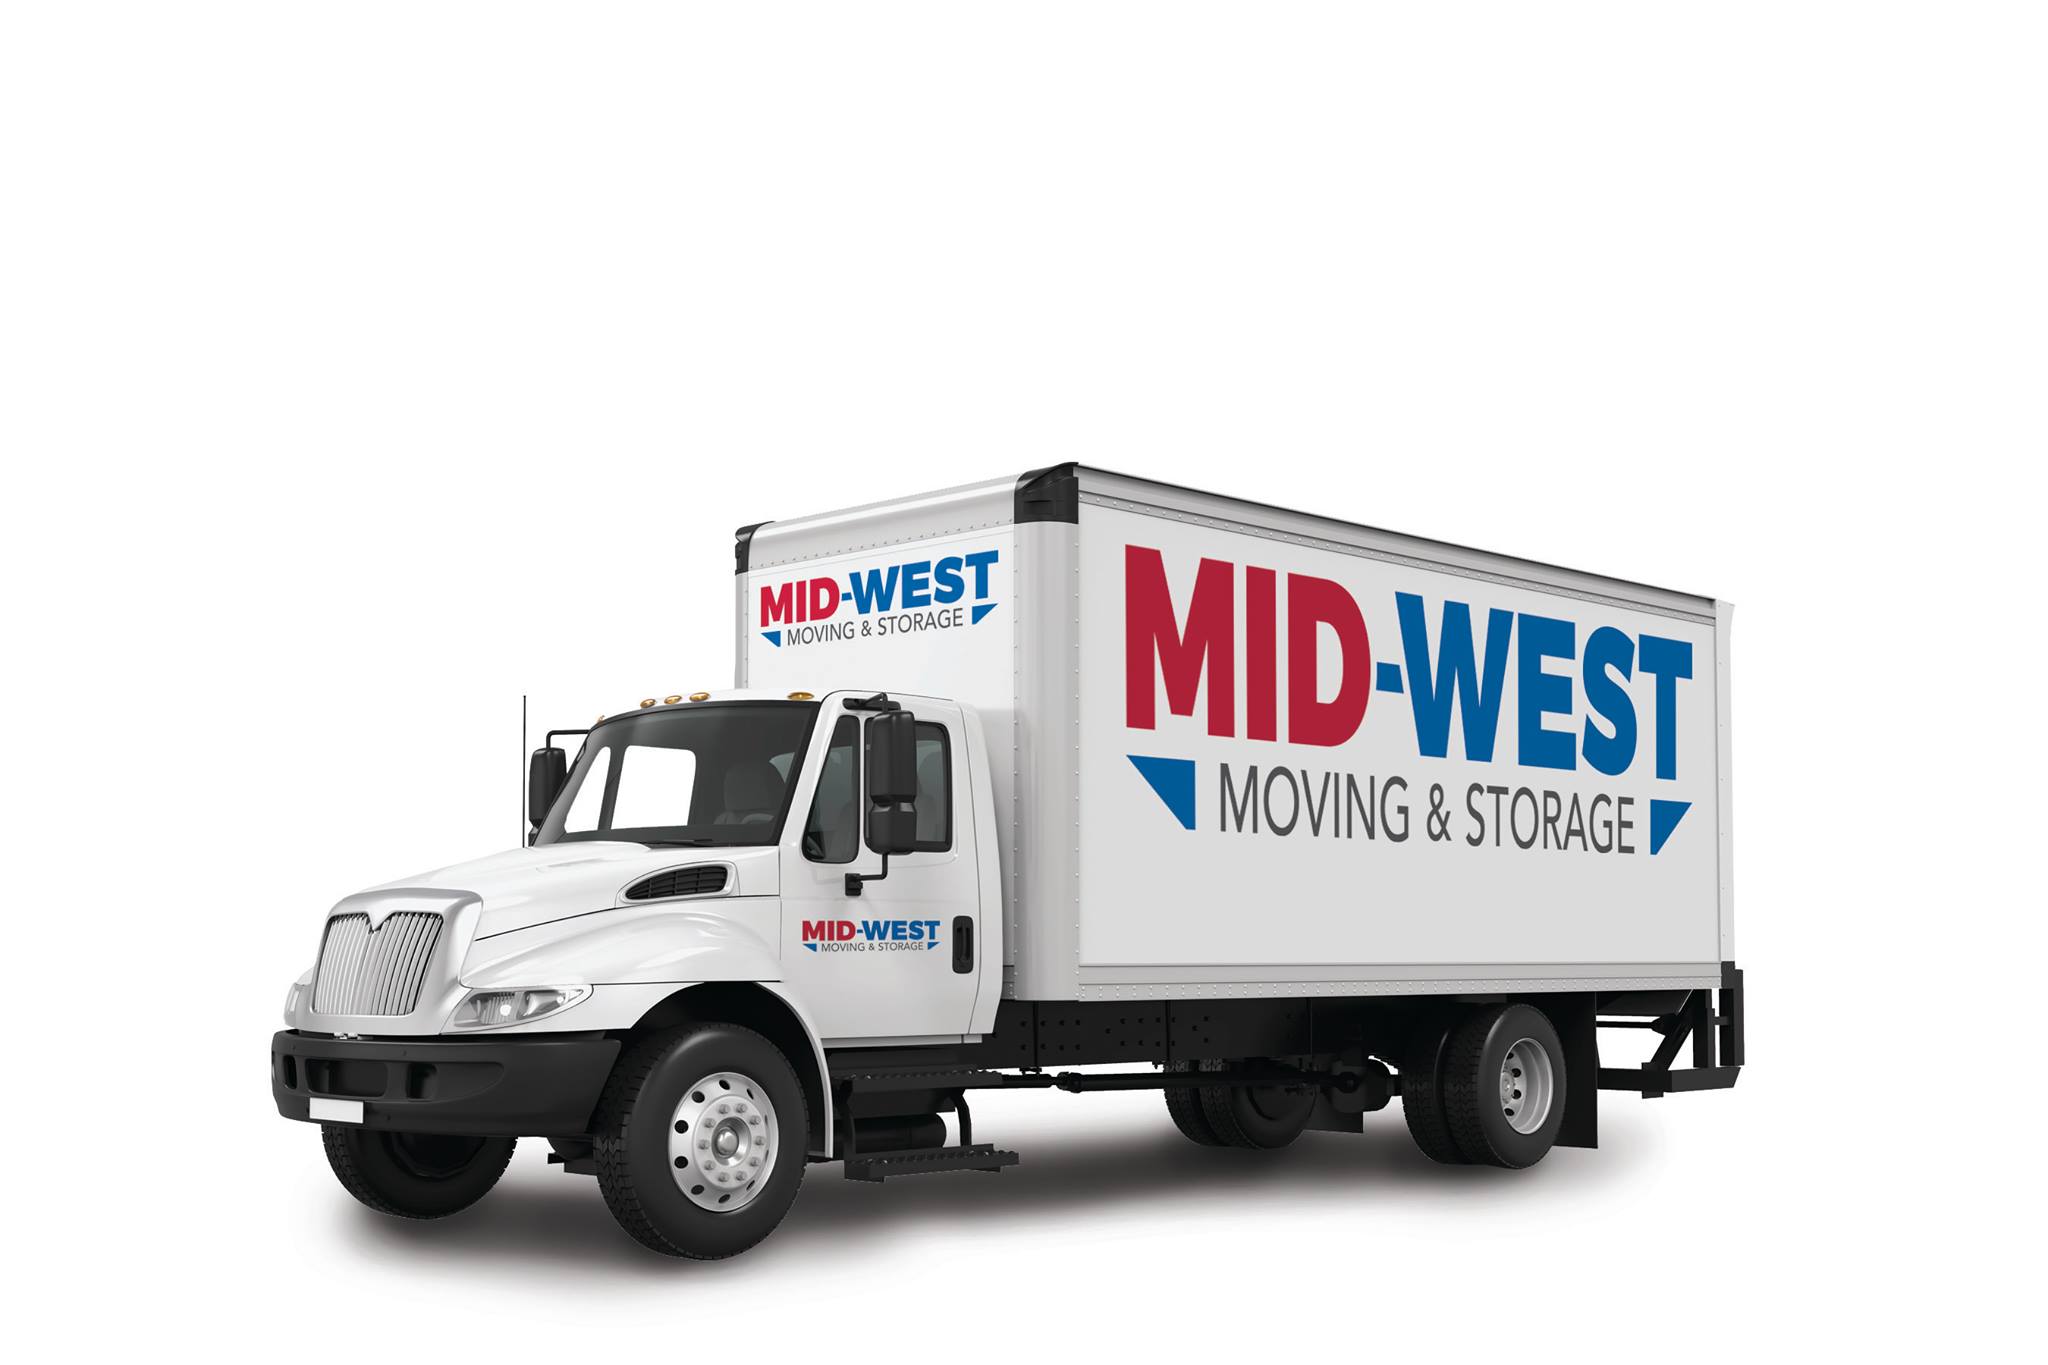 Mid-West-Moving-&-Storage-Truck